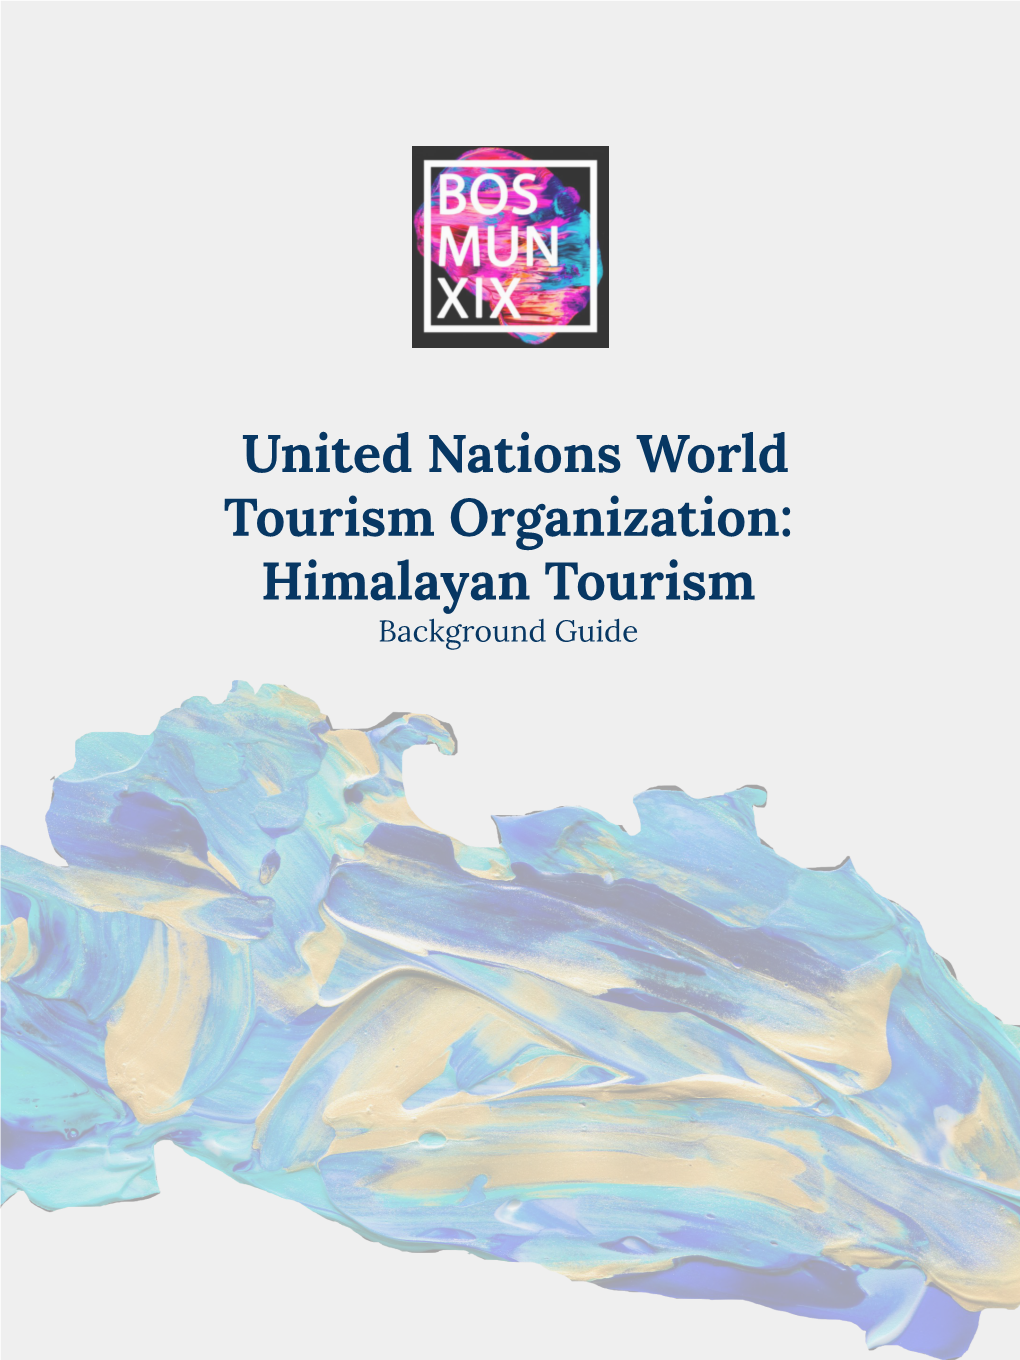 United Nations World Tourism Organization: Himalayan Tourism Background Guide Table of Contents